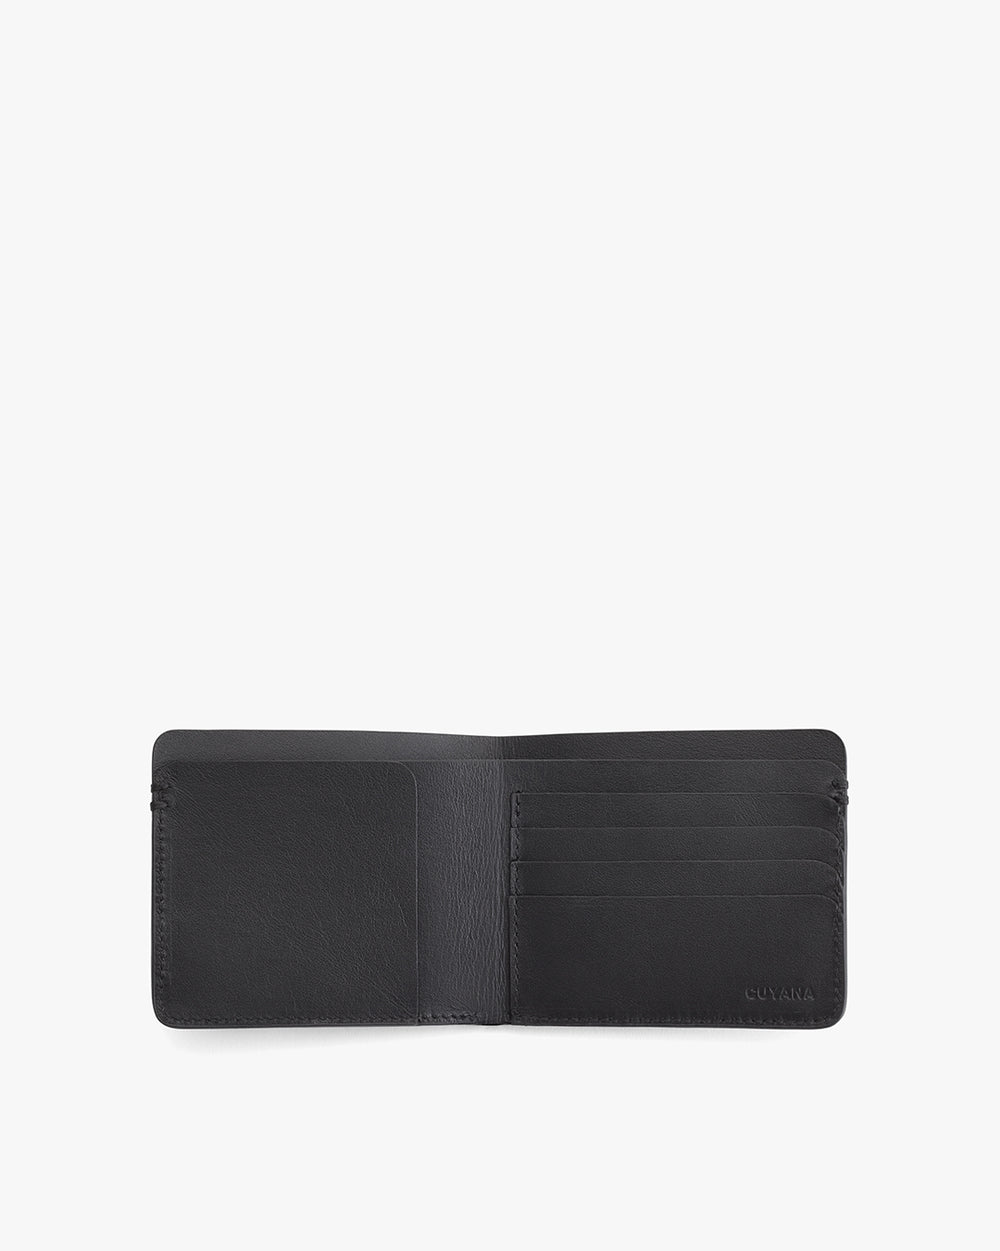 Open wallet with multiple card slots and embossed branding.